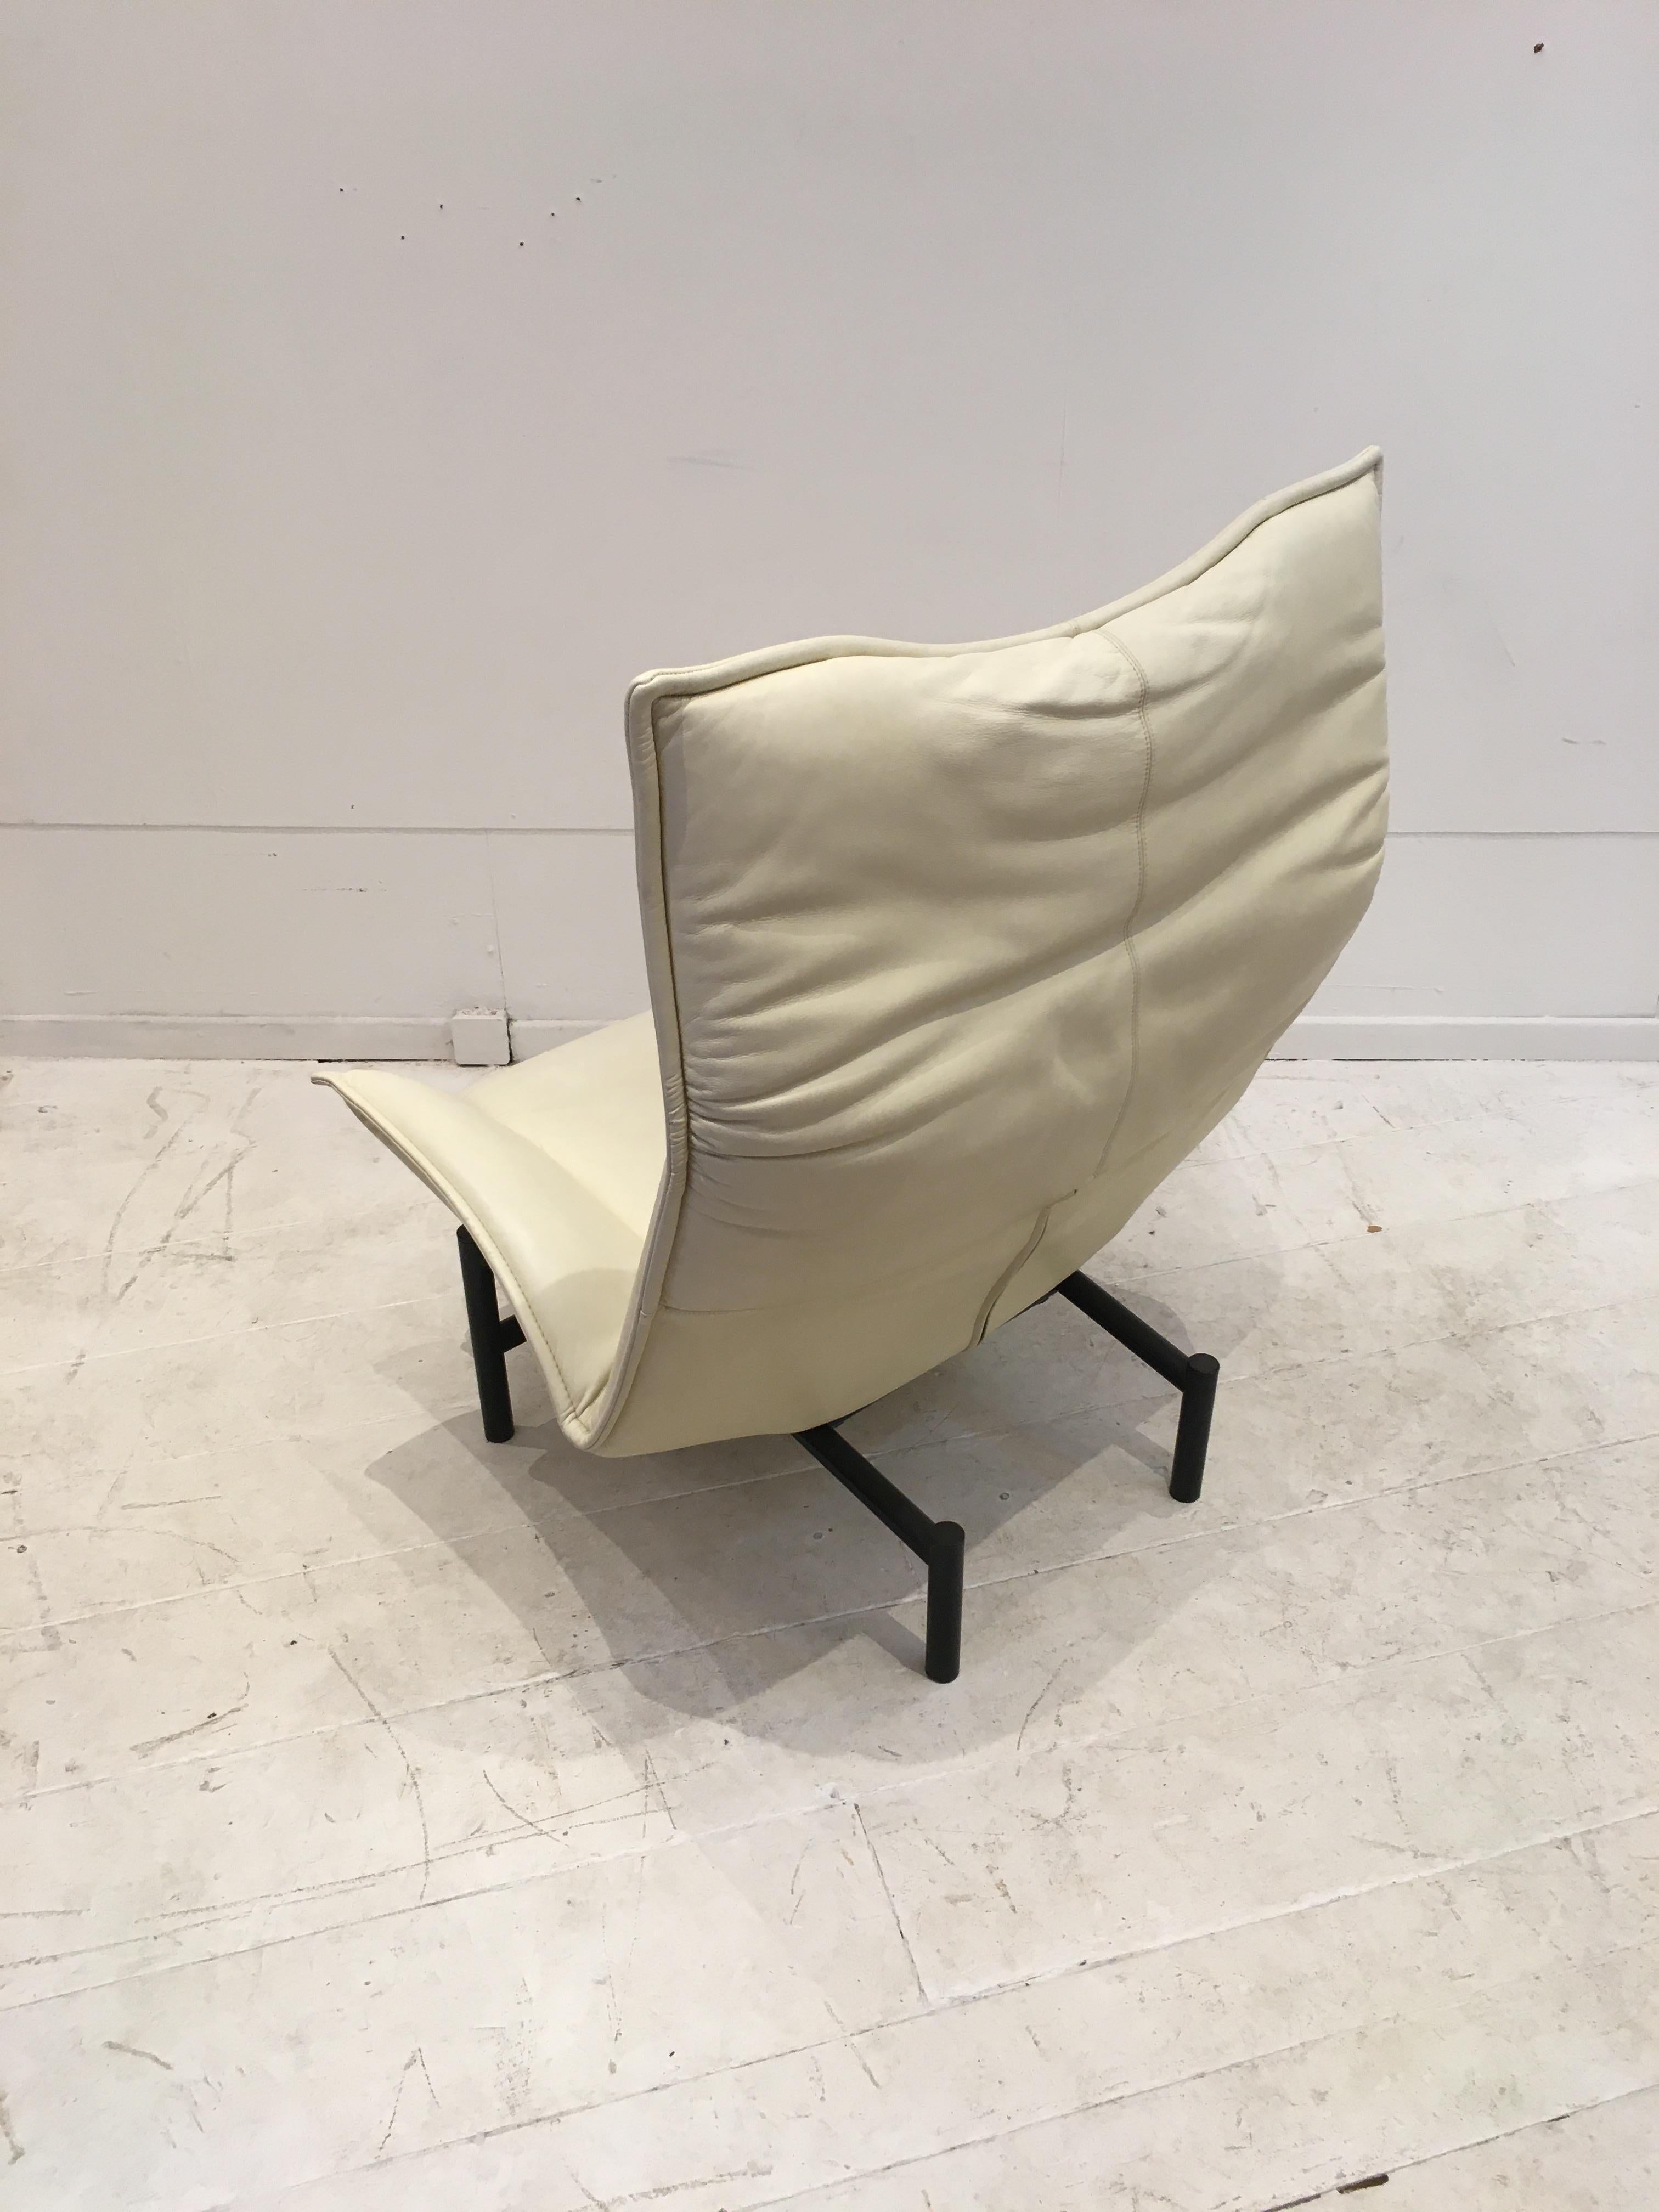 Late 20th Century Lounge Chair 'White' by Vico Magistretti for Cassina